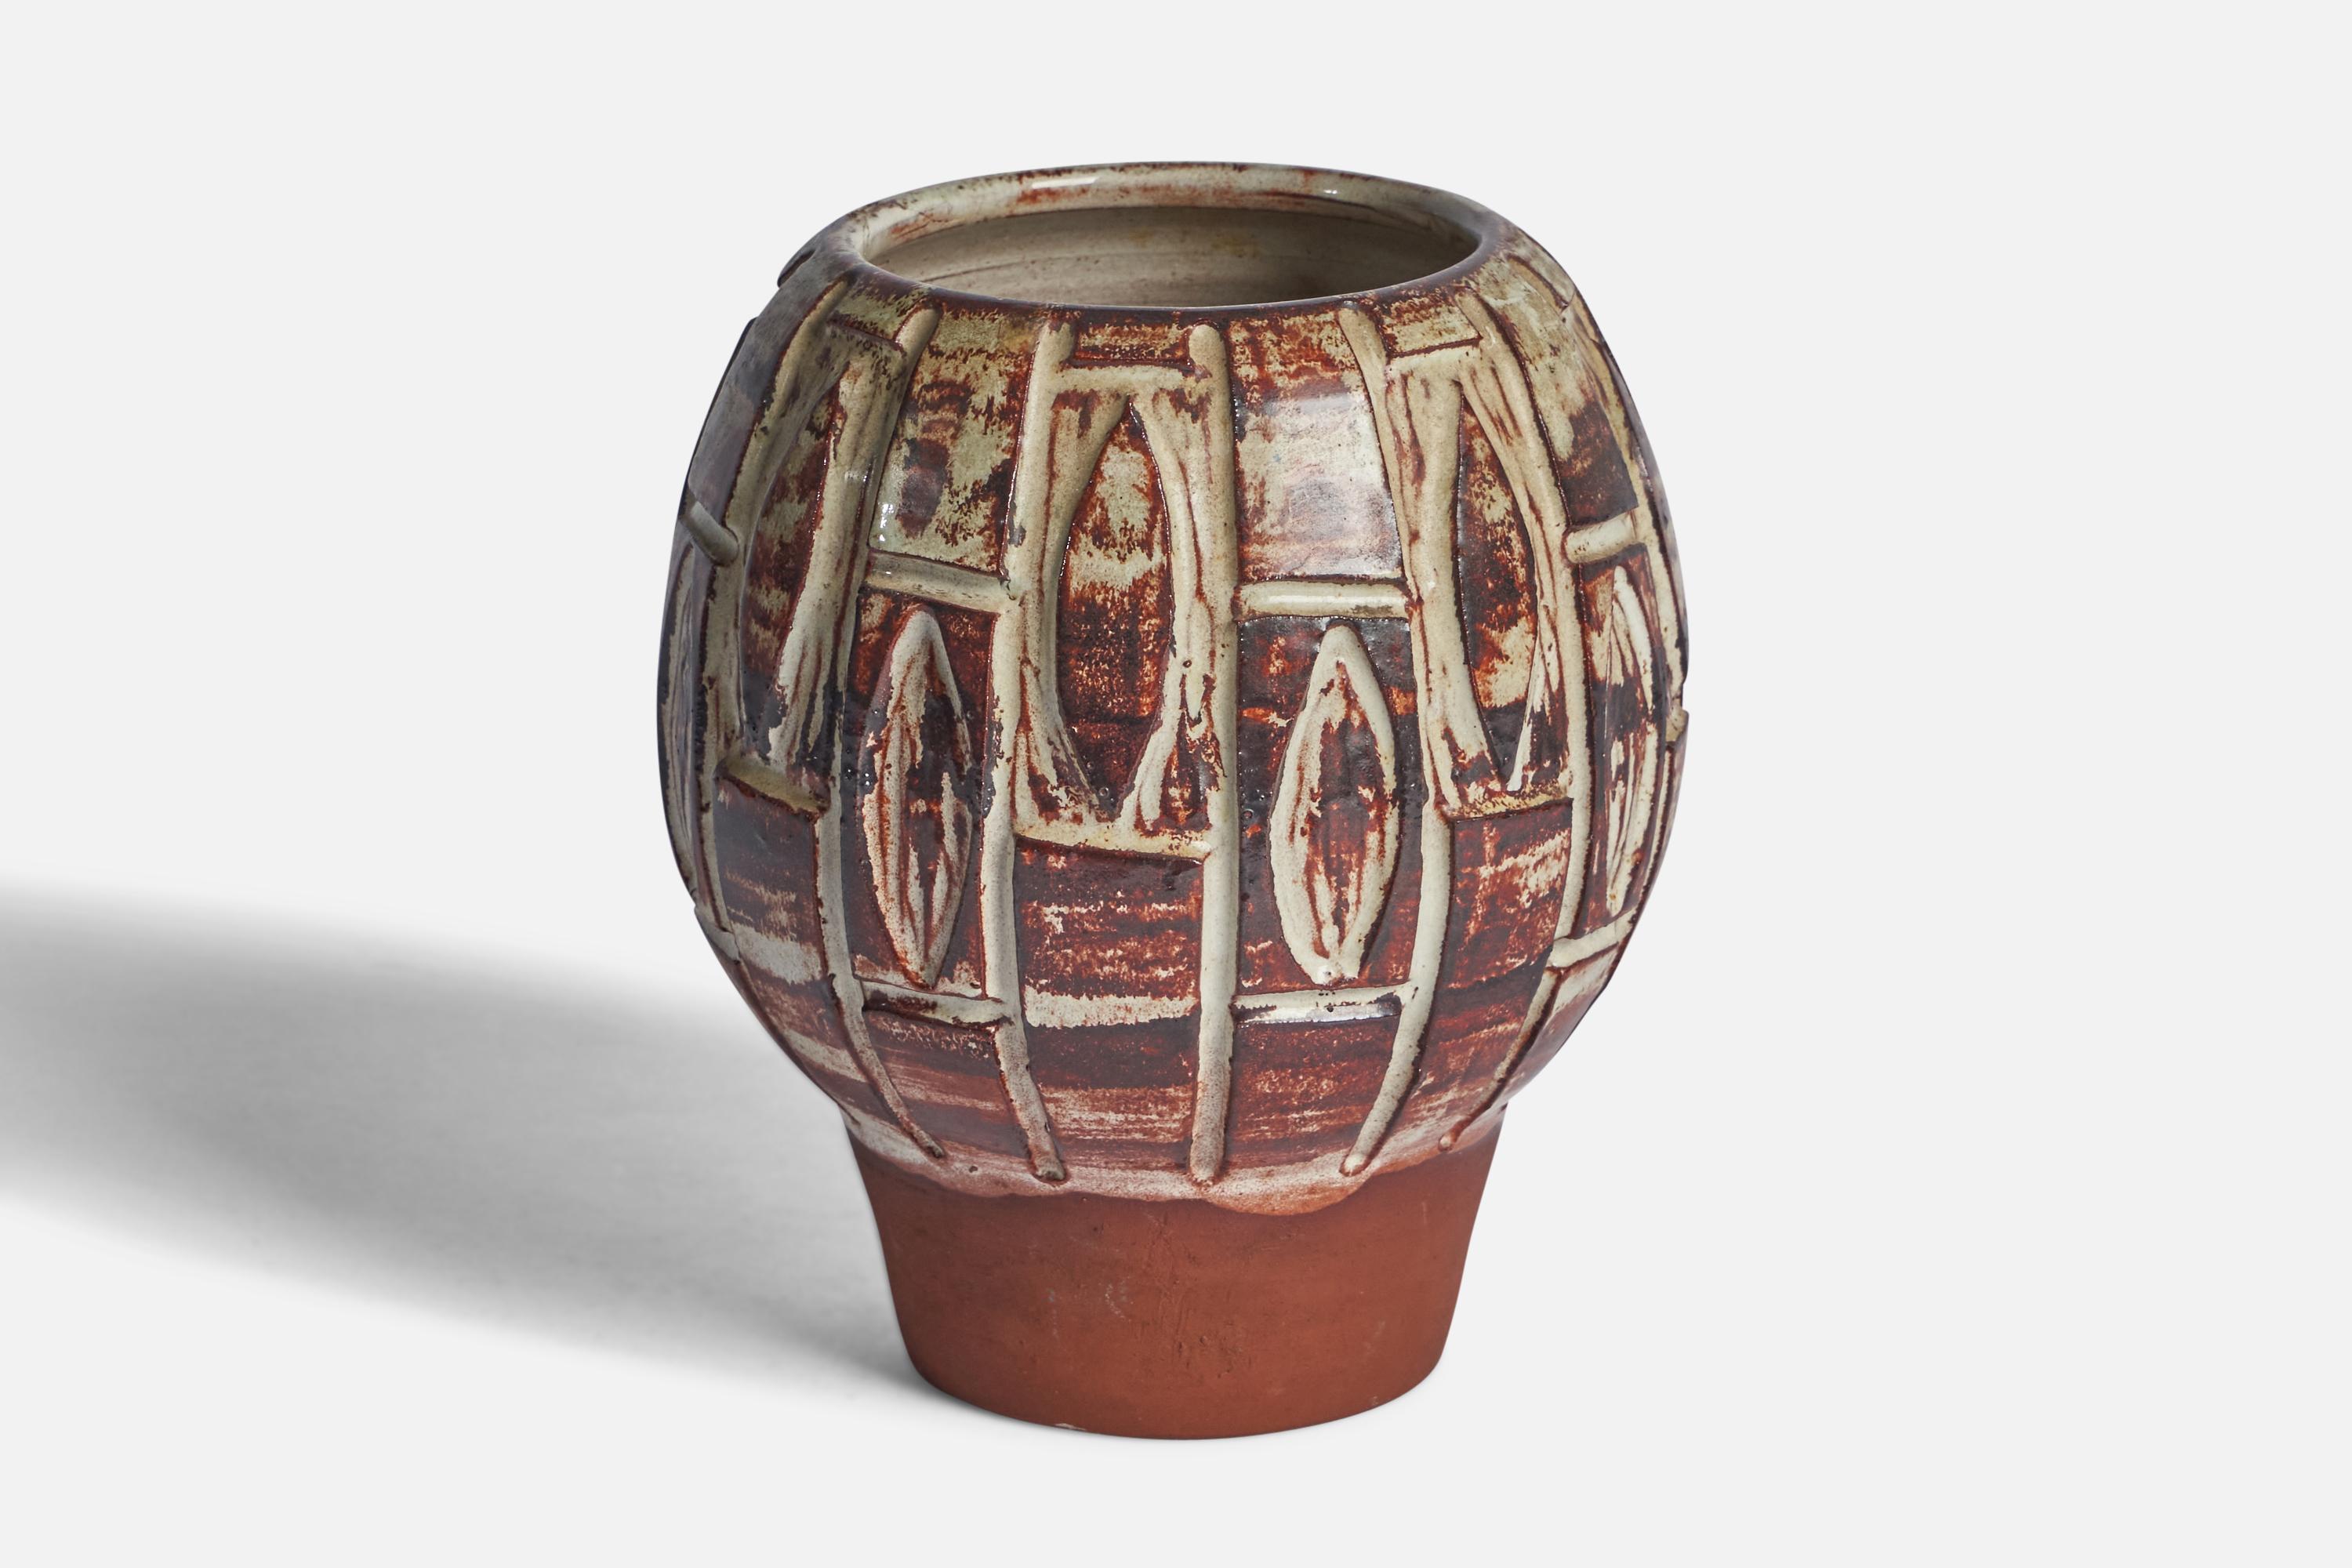 A semi-glazed brown and grey stoneware vase designed and produced by Björn Backhausen, Bornholm, Denmark, c. 1960s.